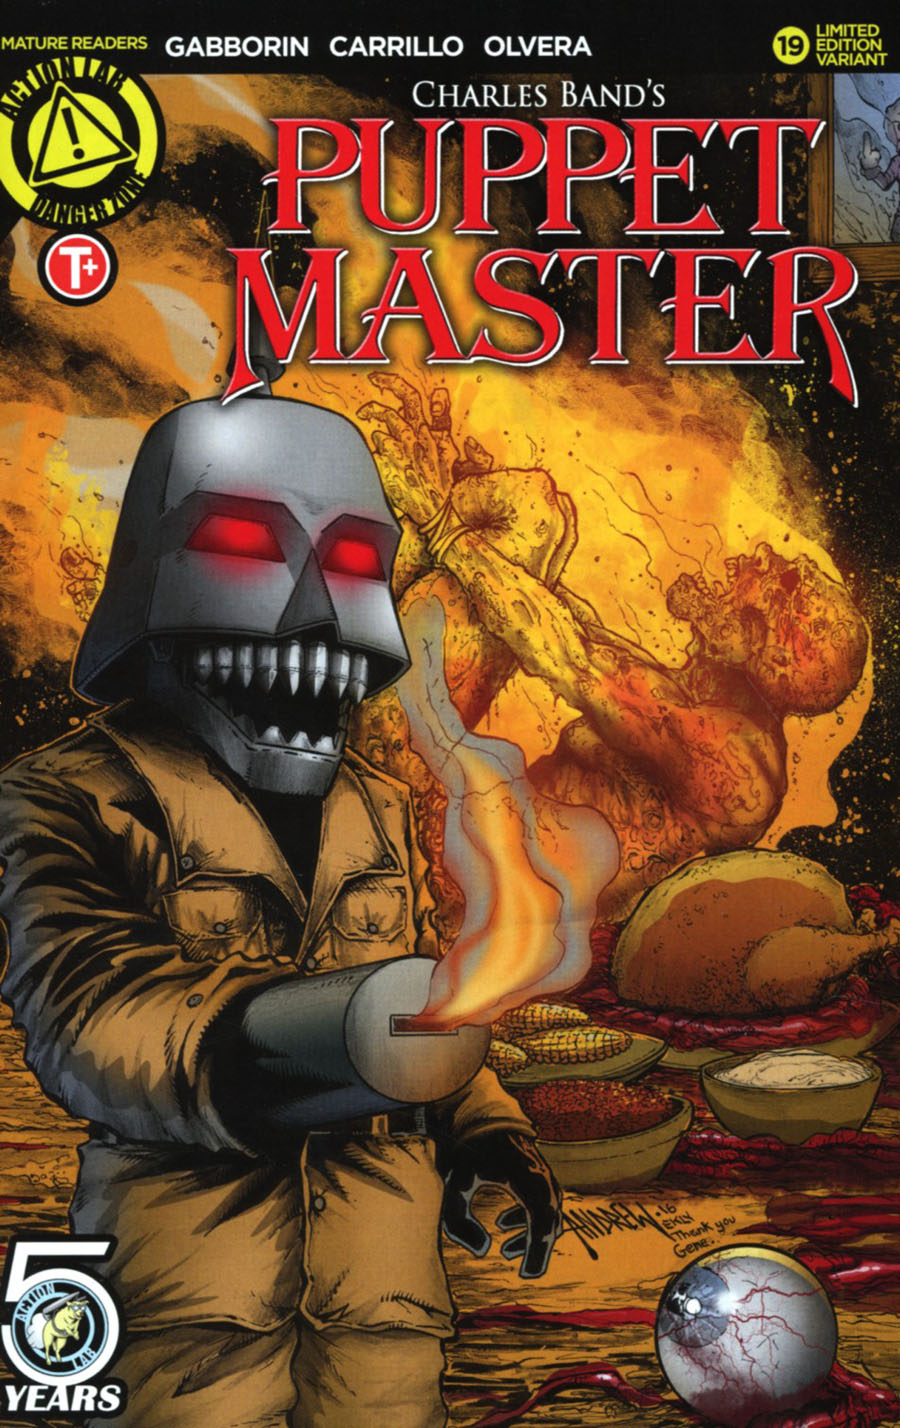 Puppet Master #19 Cover D Variant Andrew Mangum Color Cover